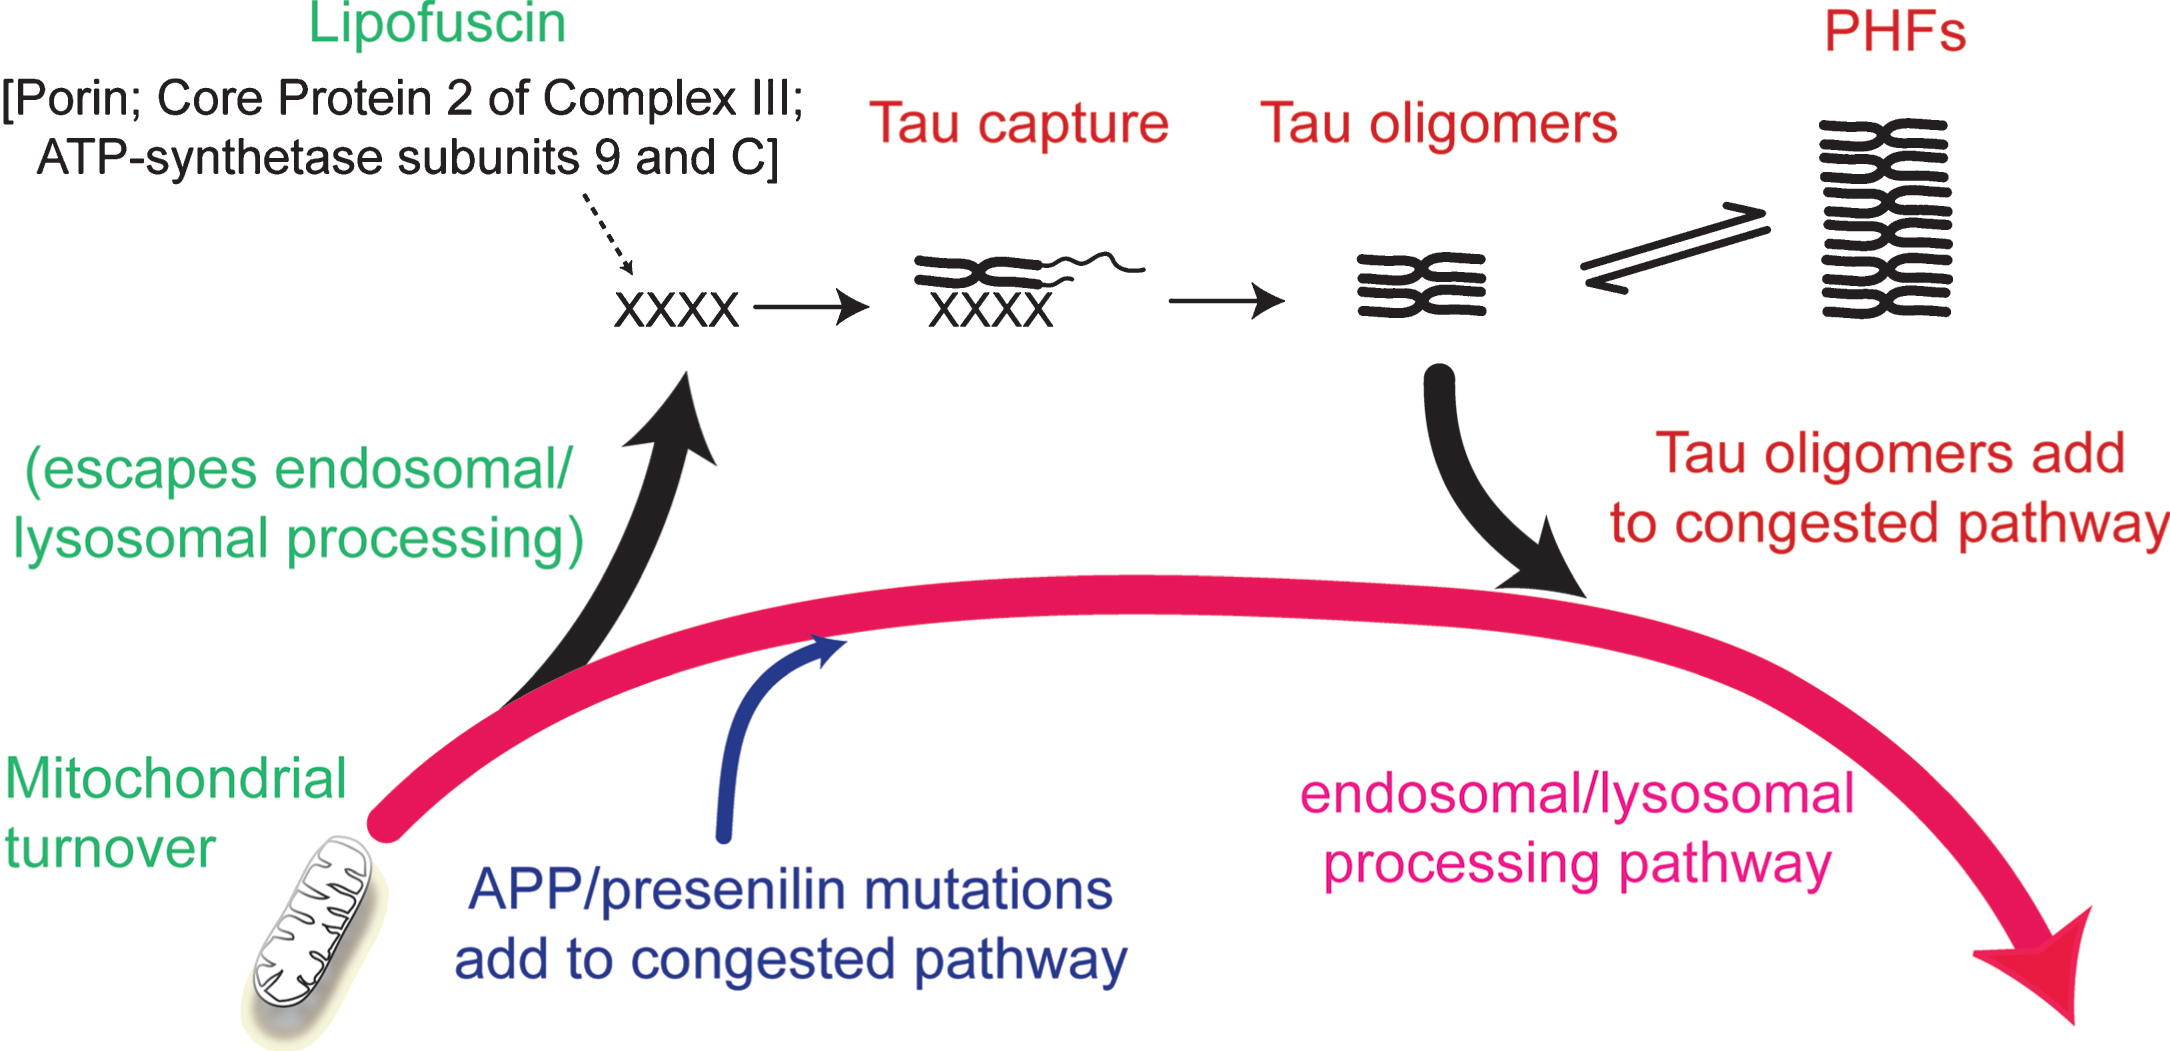 Involvement of the endosomal–lysosomal pathway in removal of aggregated proteins. Congestion of the clearance pathway associated with progressive age-related failure of normal mitochondrial turnover leads to release of products of failed clearance which become seeds for triggering tau aggregation. The resulting tau oligomers add to congestion in the pathway and themselves catalyze further tau aggregation. The tau aggregation cascade proceeds by an autocatalytic process of binding and proteolysis of tau, initiated through its capture of by-products of failed mitochondrial clearance resulting from age-related failure of endosomal–lysosomal processing. Source: From Wischik et al., Biochem Pharmacol 88, 529–539, 2014.